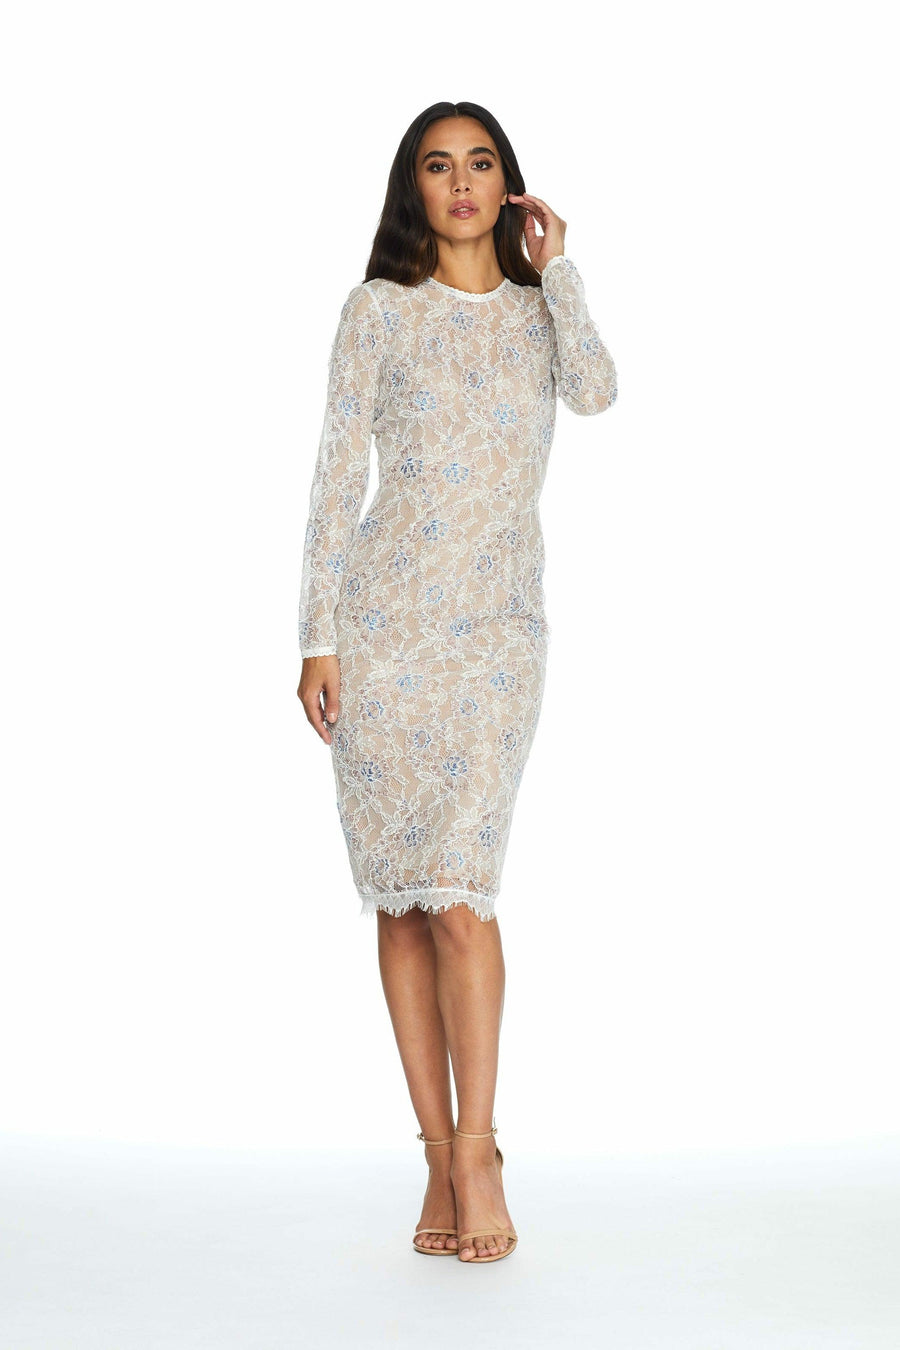 Kay Lace Embroidery Dress - Dress the Population